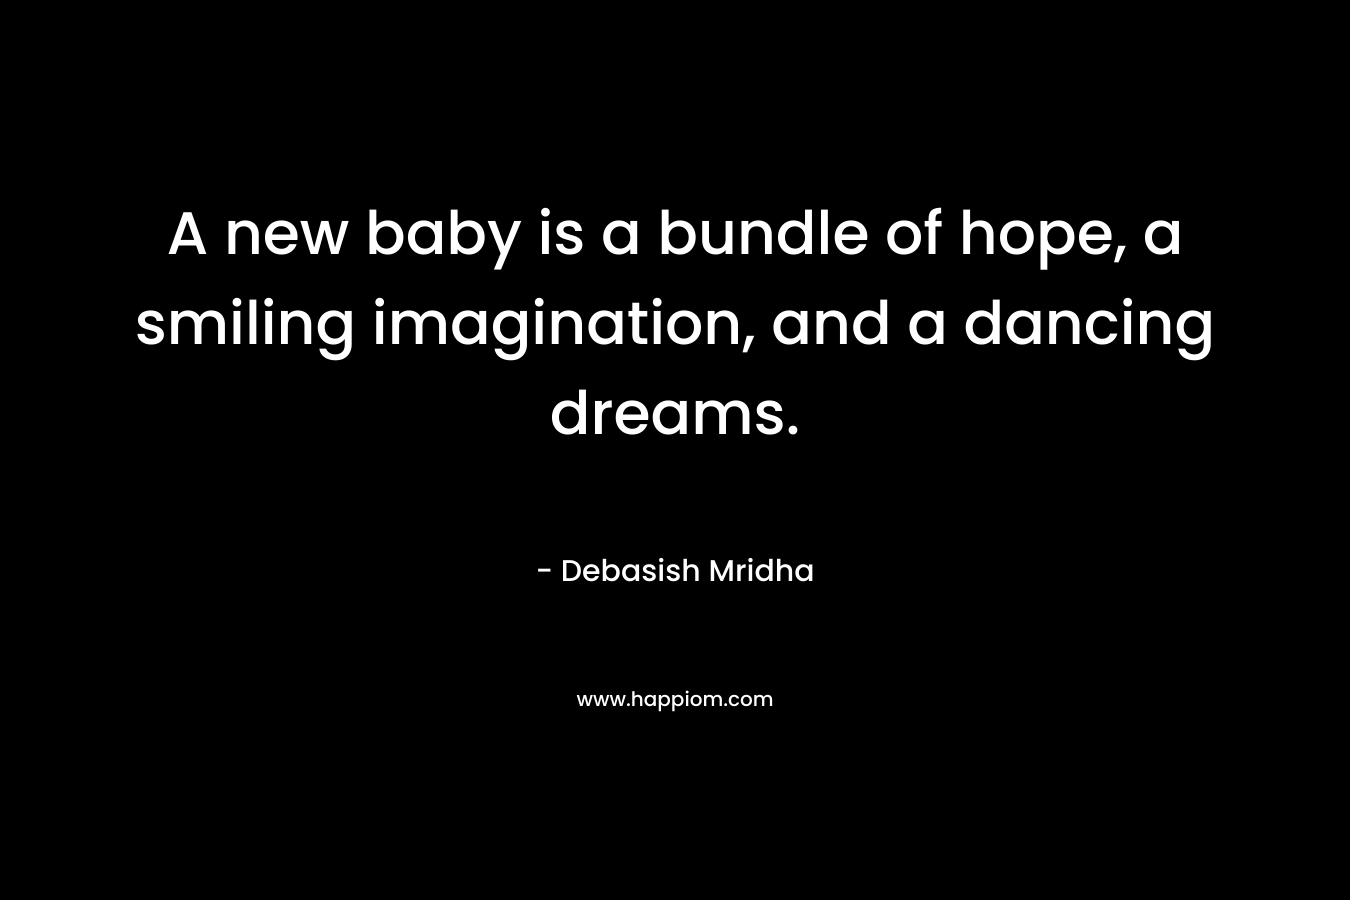 A new baby is a bundle of hope, a smiling imagination, and a dancing dreams.